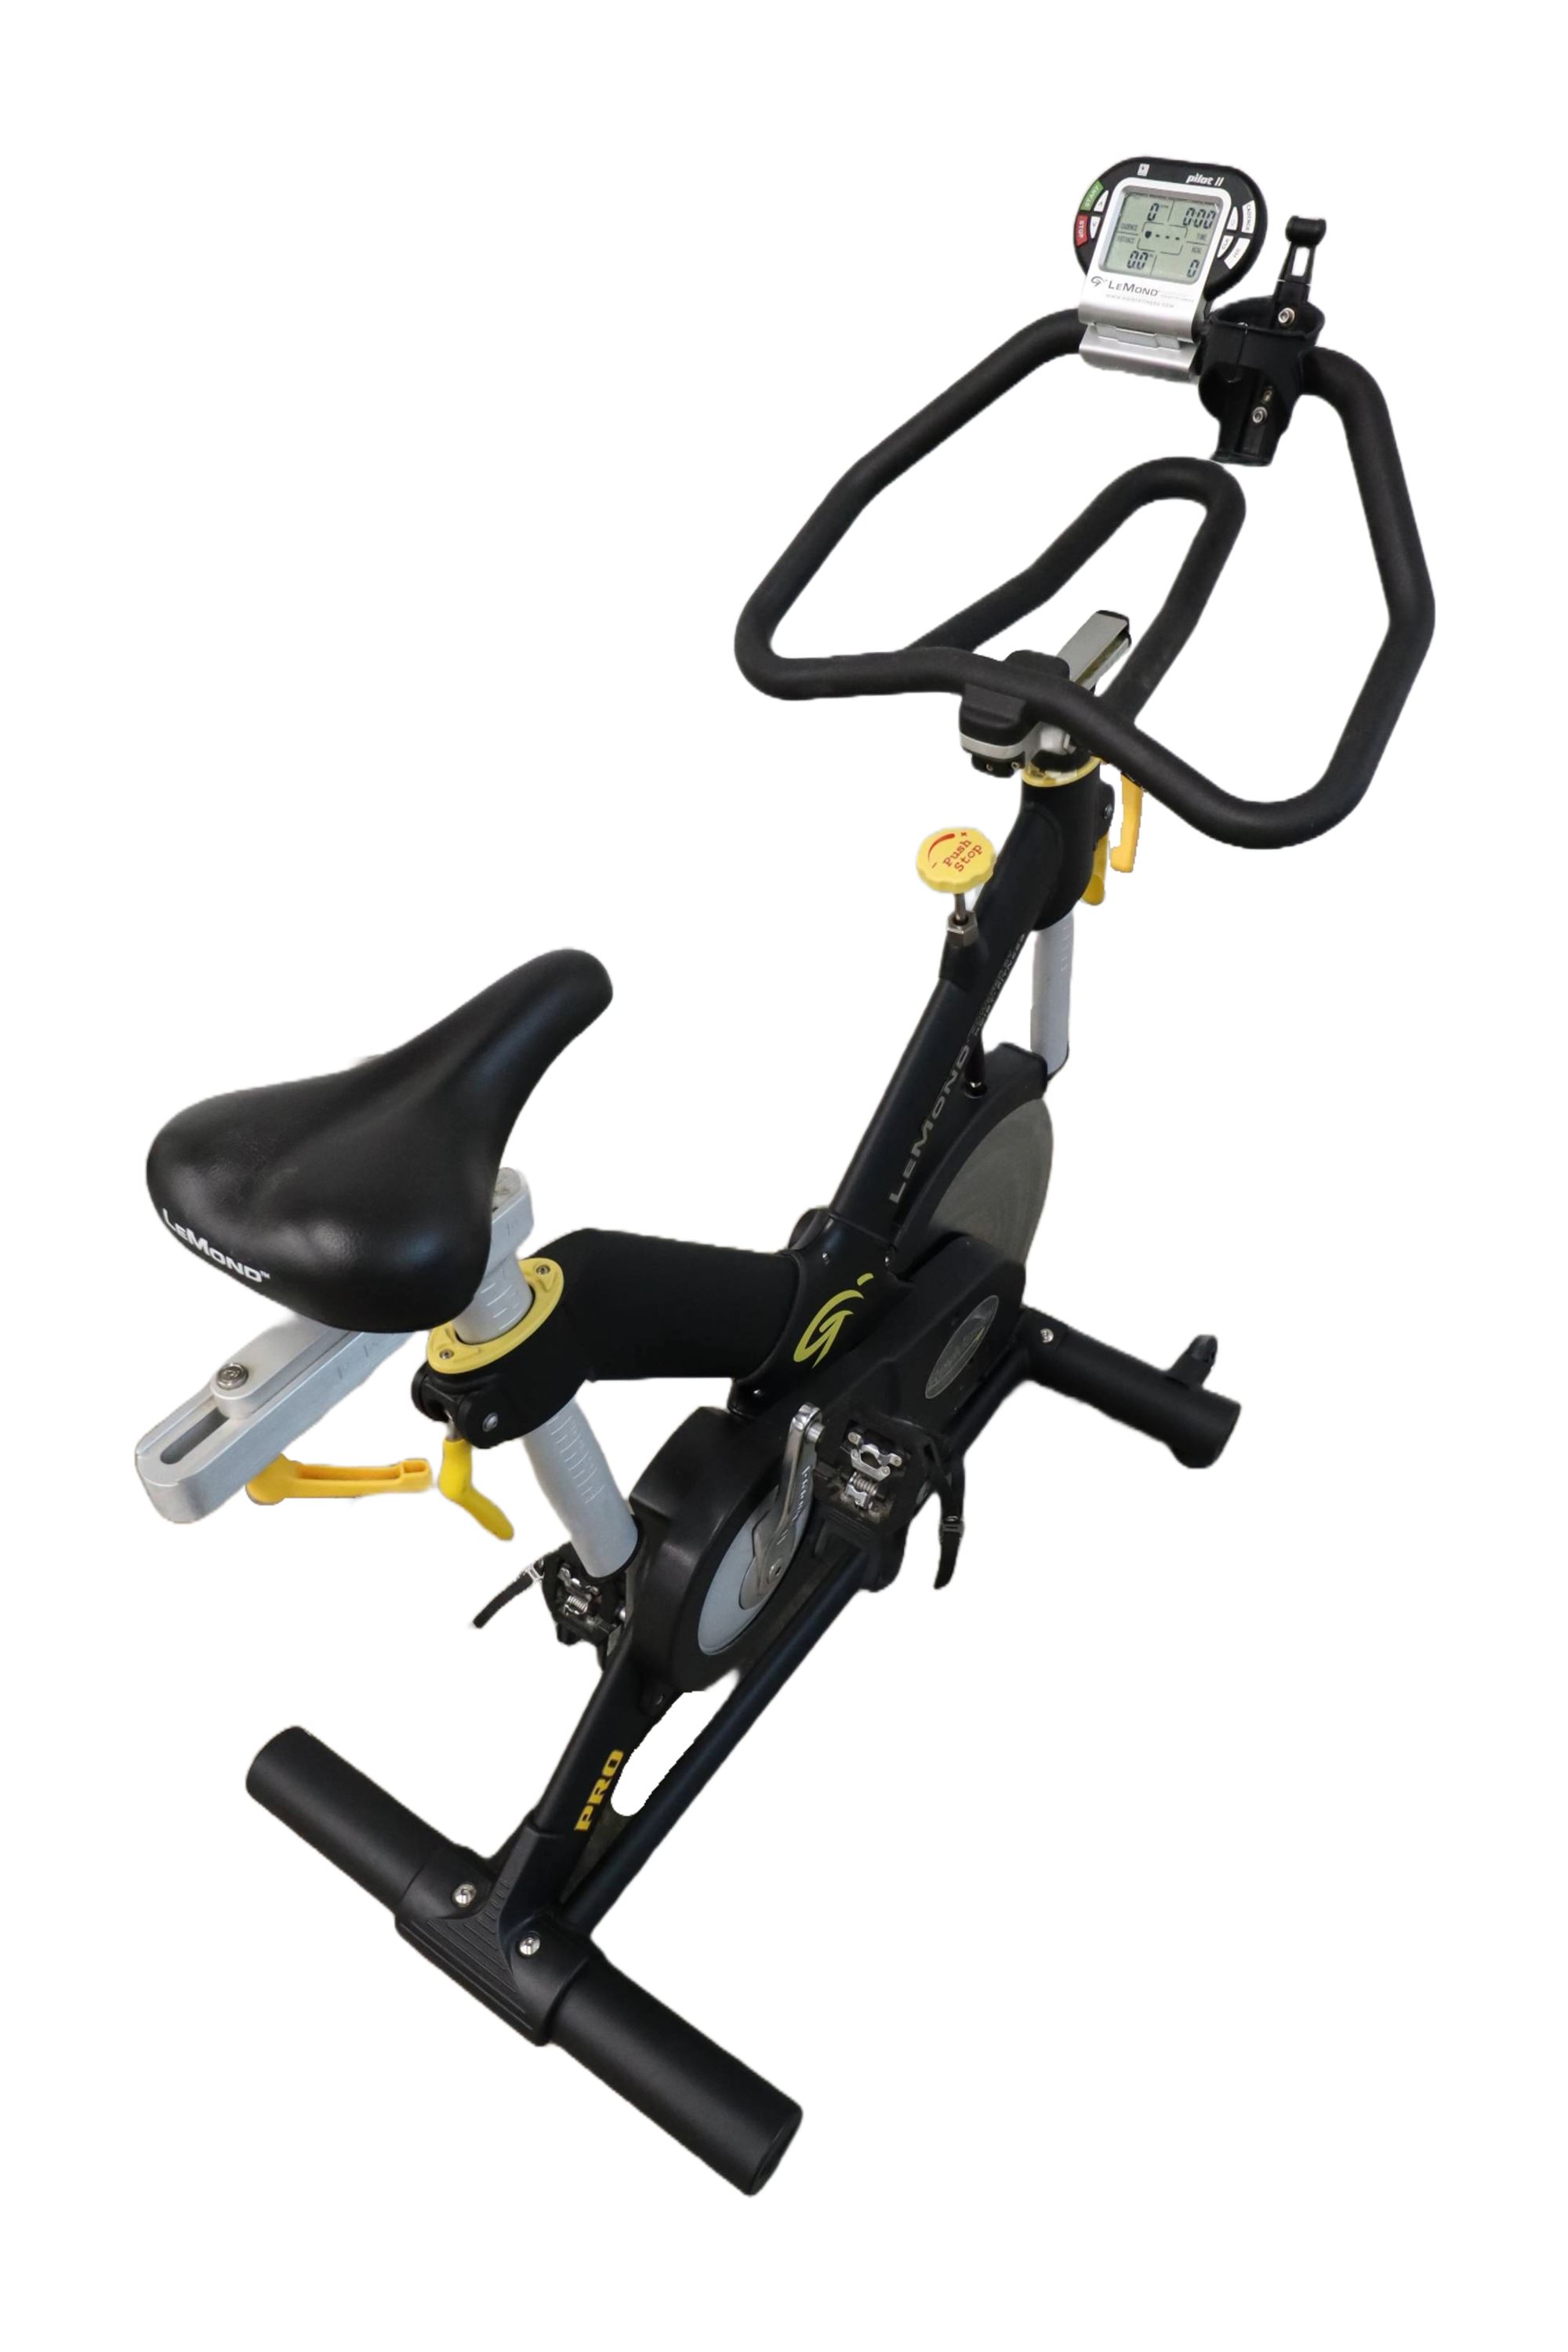 Used LeMond Revmaster Pro Indoor Cycle w Pilot II Computer Display L-15300-A 19-10-A01 Upright Stationary Bike